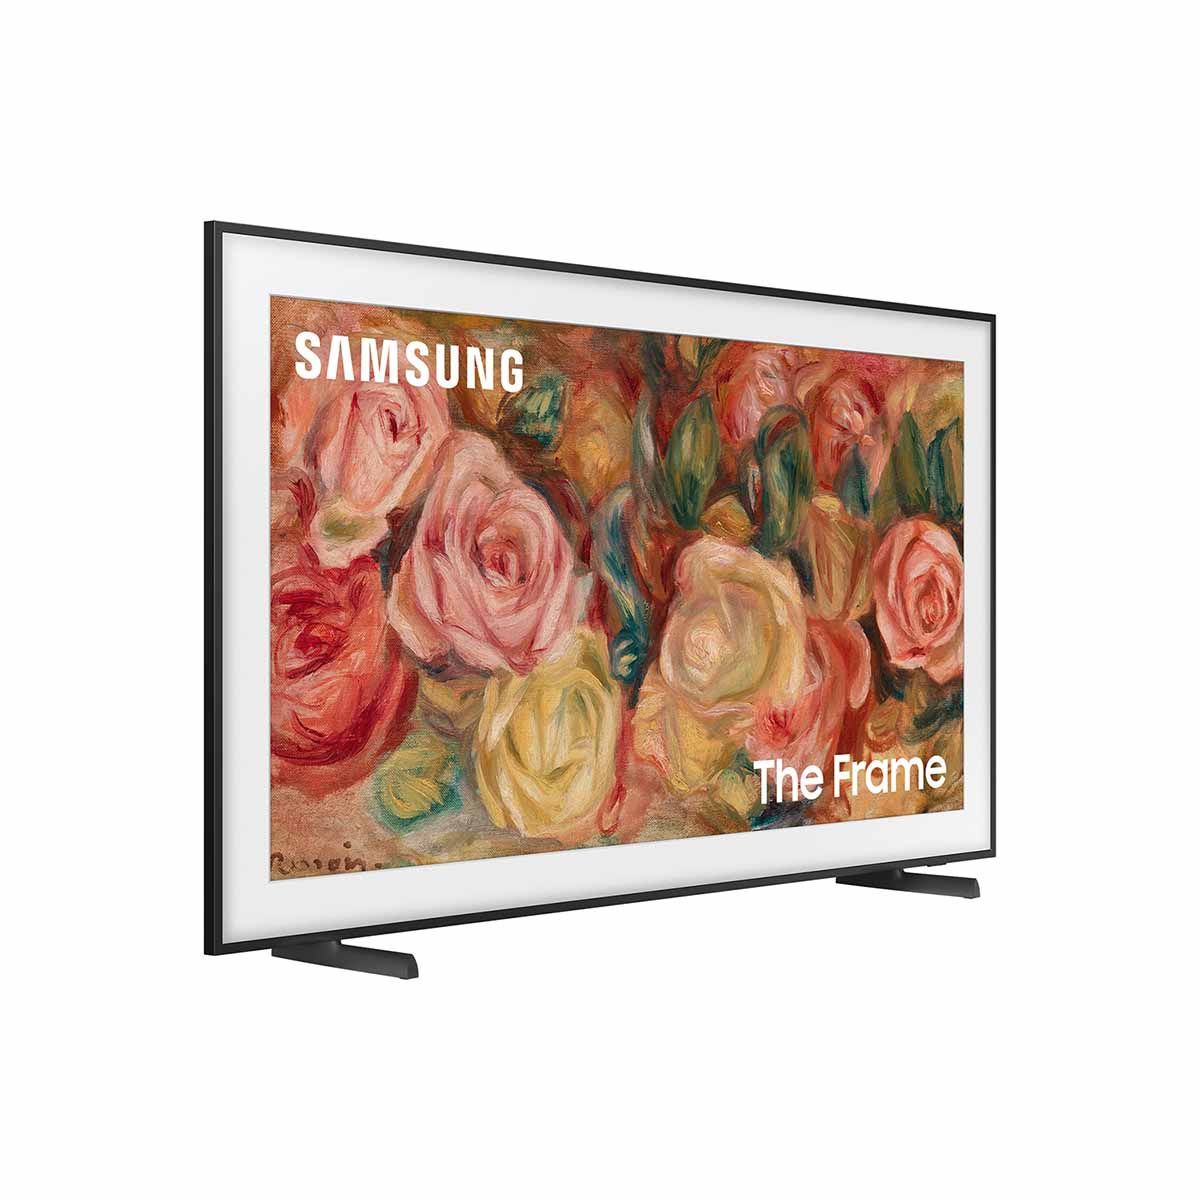 Samsung LS03D The Frame QLED HDR Smart TV - 65" with stand - angled front left view